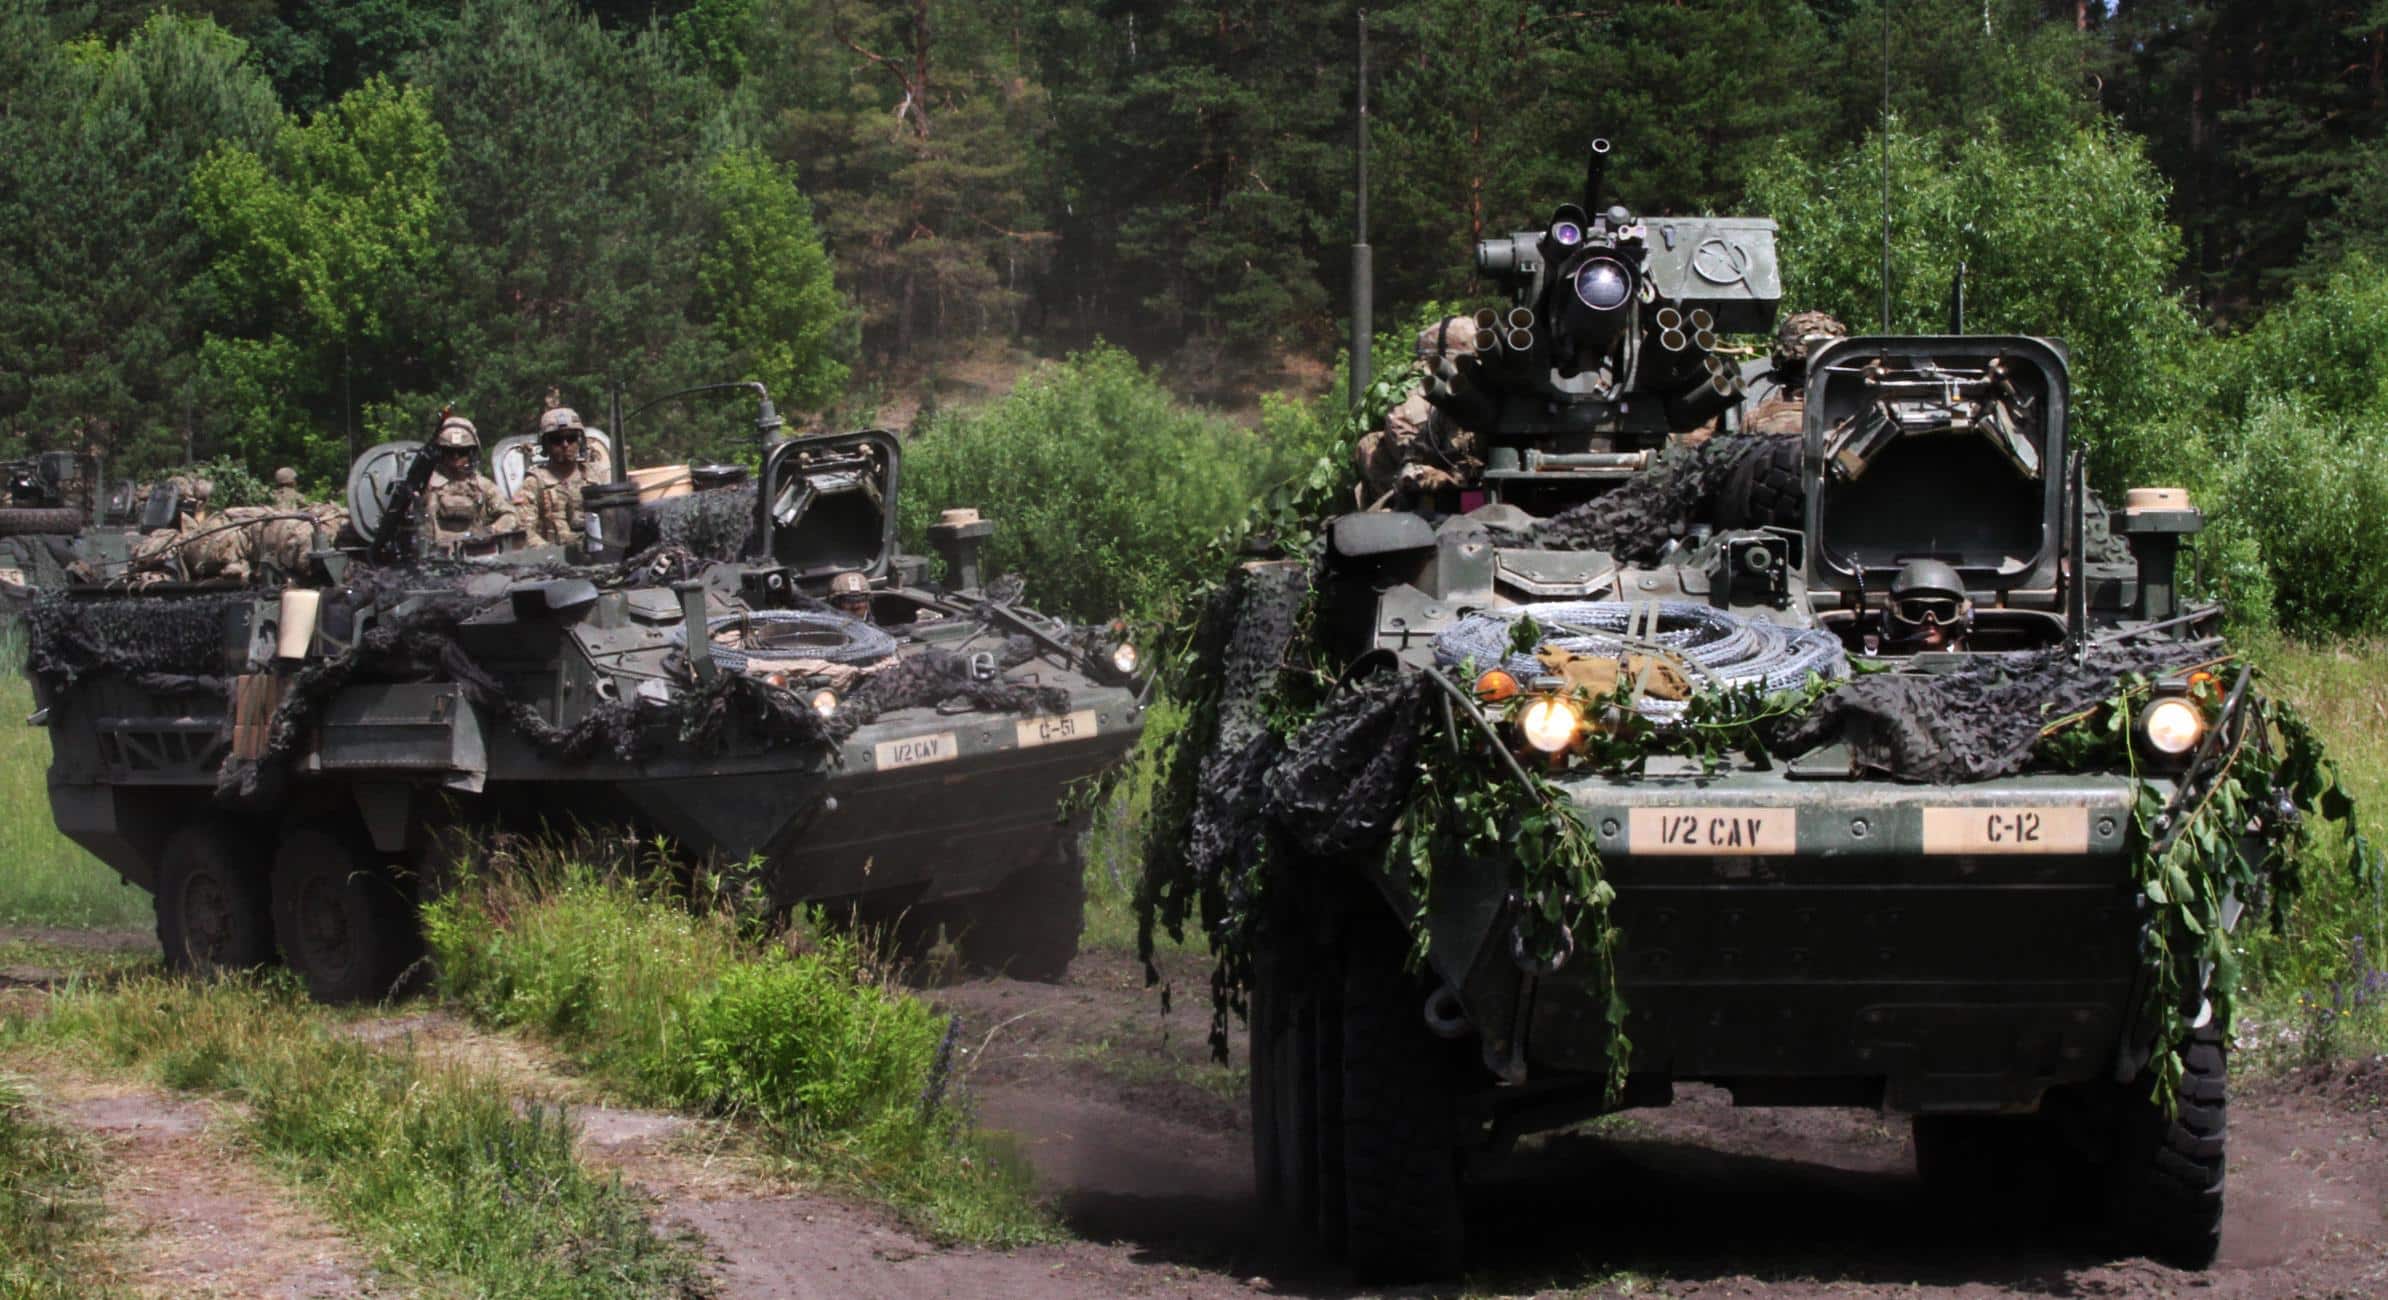 U.S. soldiers in Battle Group Poland drive a U.S. Army Interim Armored Vehicle Stryker around a water hazard at the Bemowo Piskie Training Area on June 5, 2018